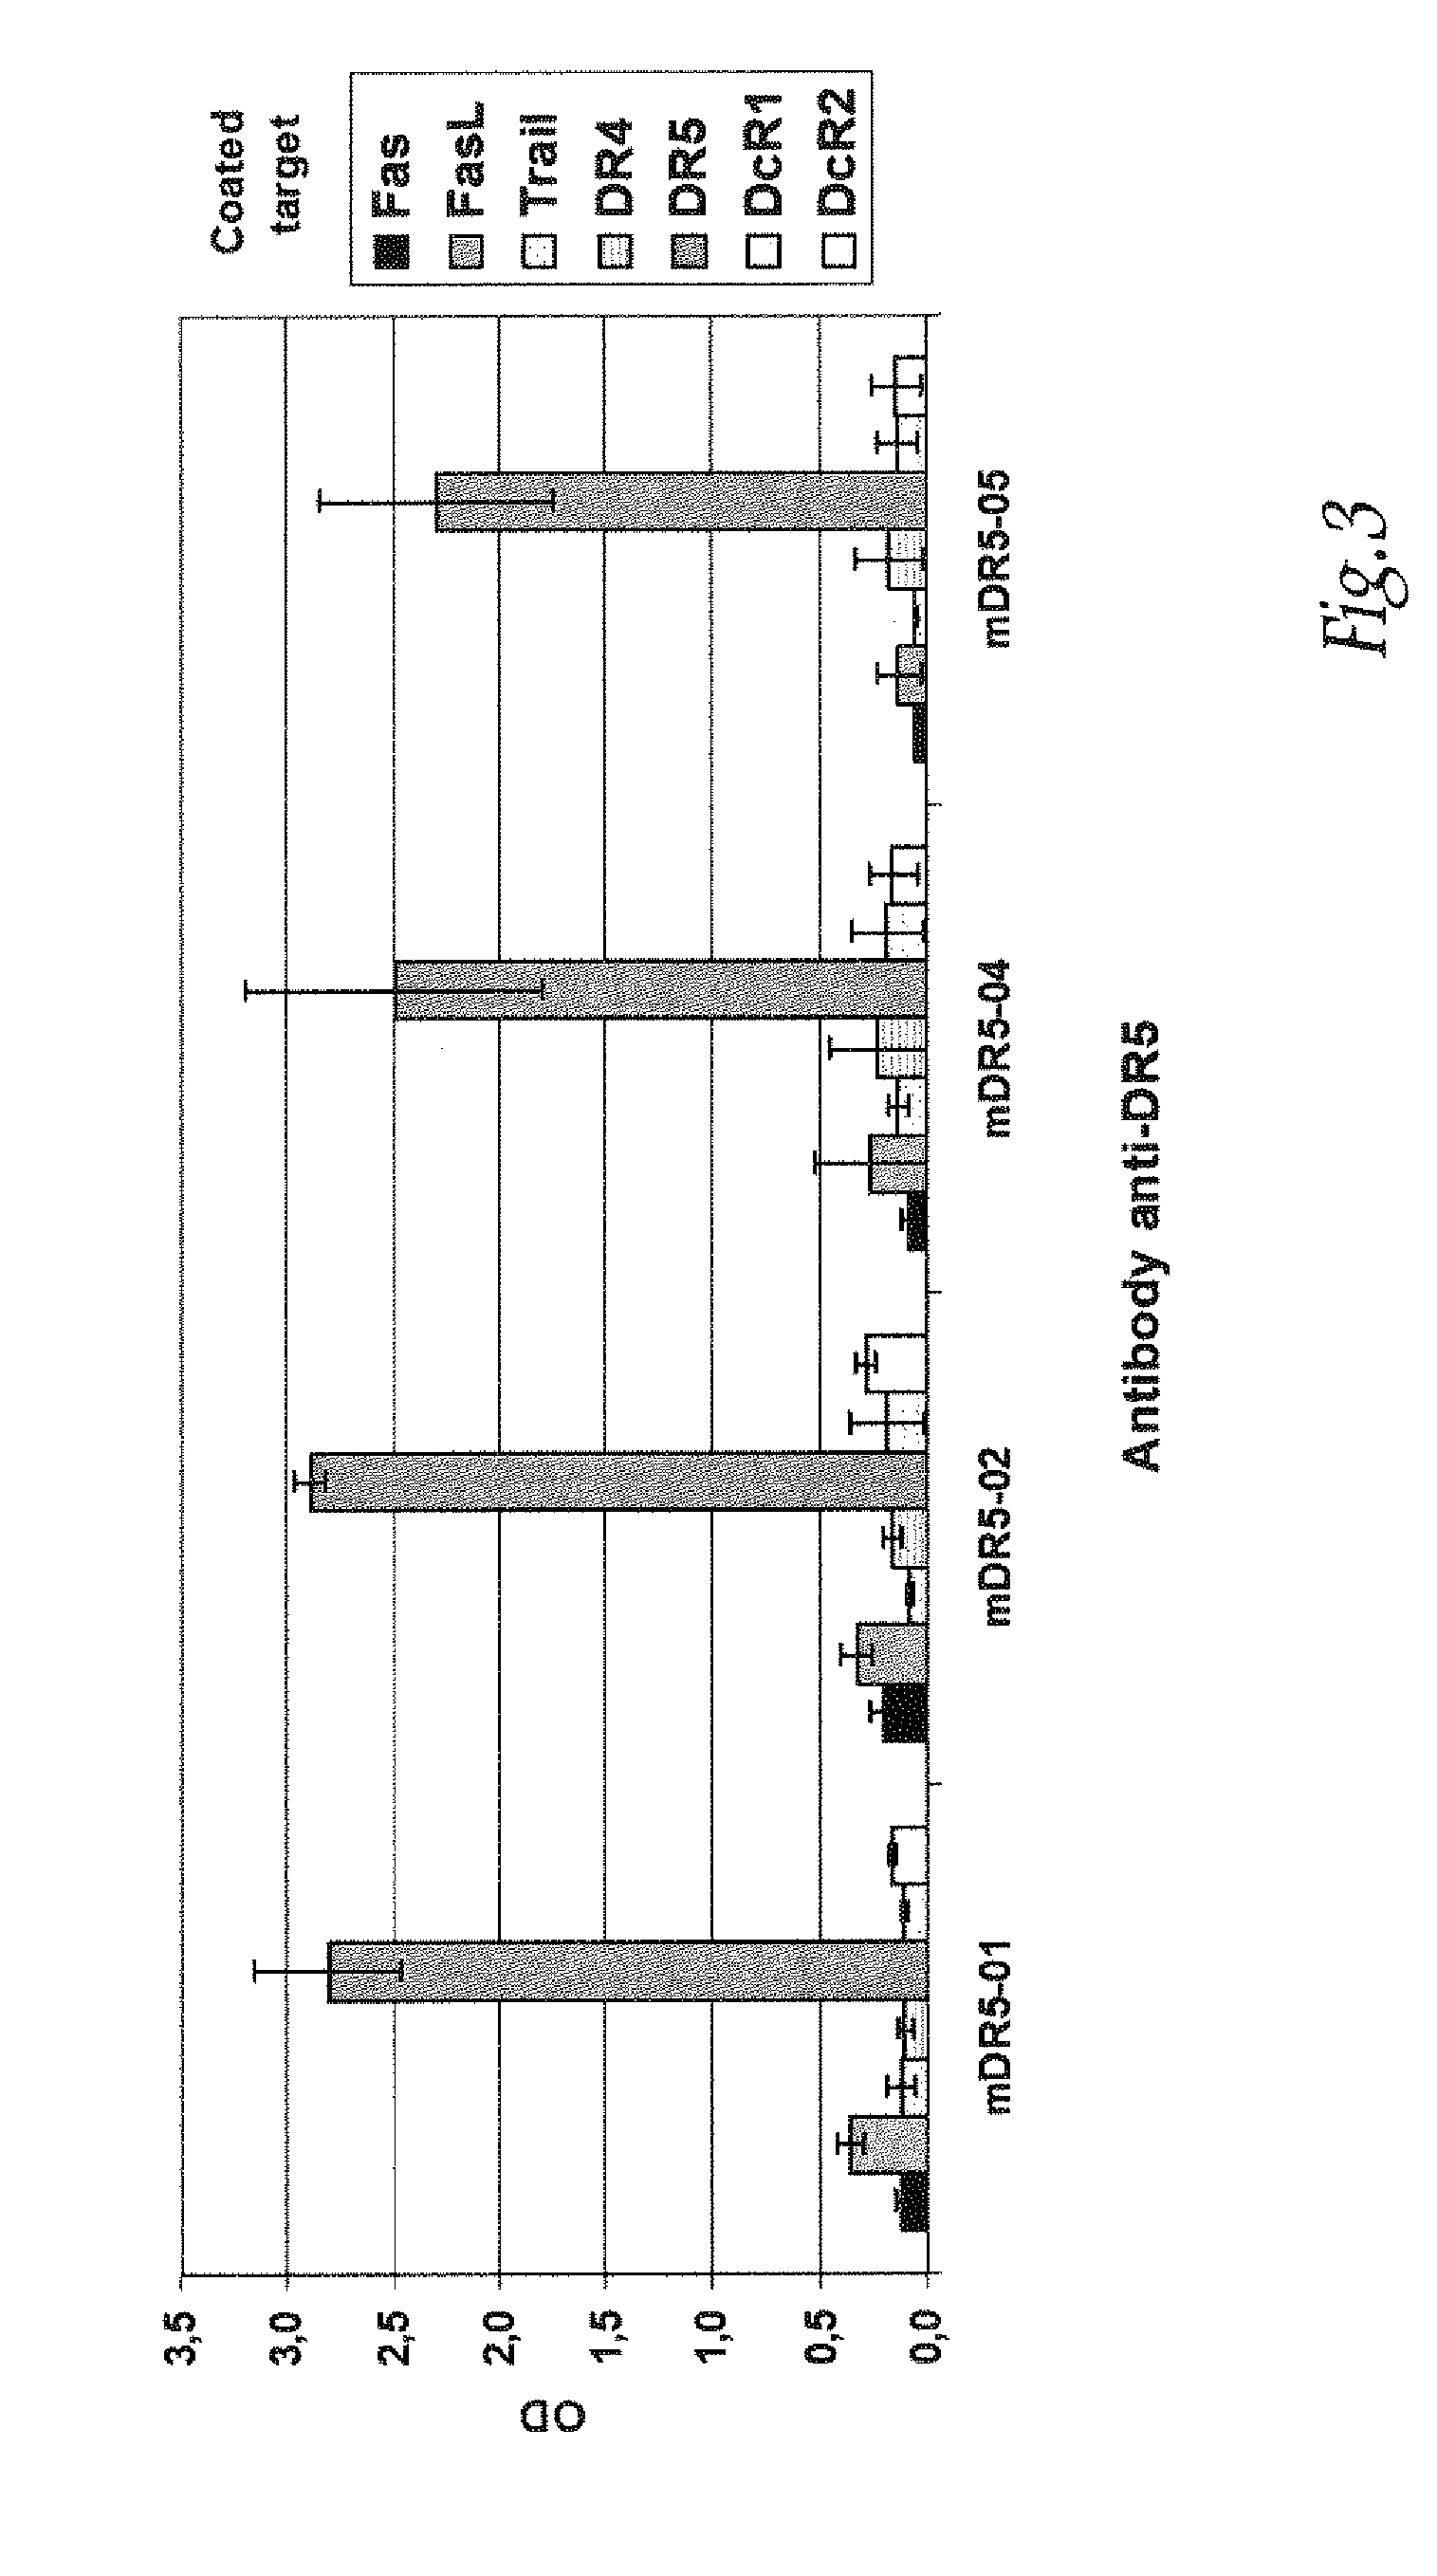 Anti-dr5 family antibodies, bispecific or multivalent Anti-dr5 family antibodies and methods of use thereof